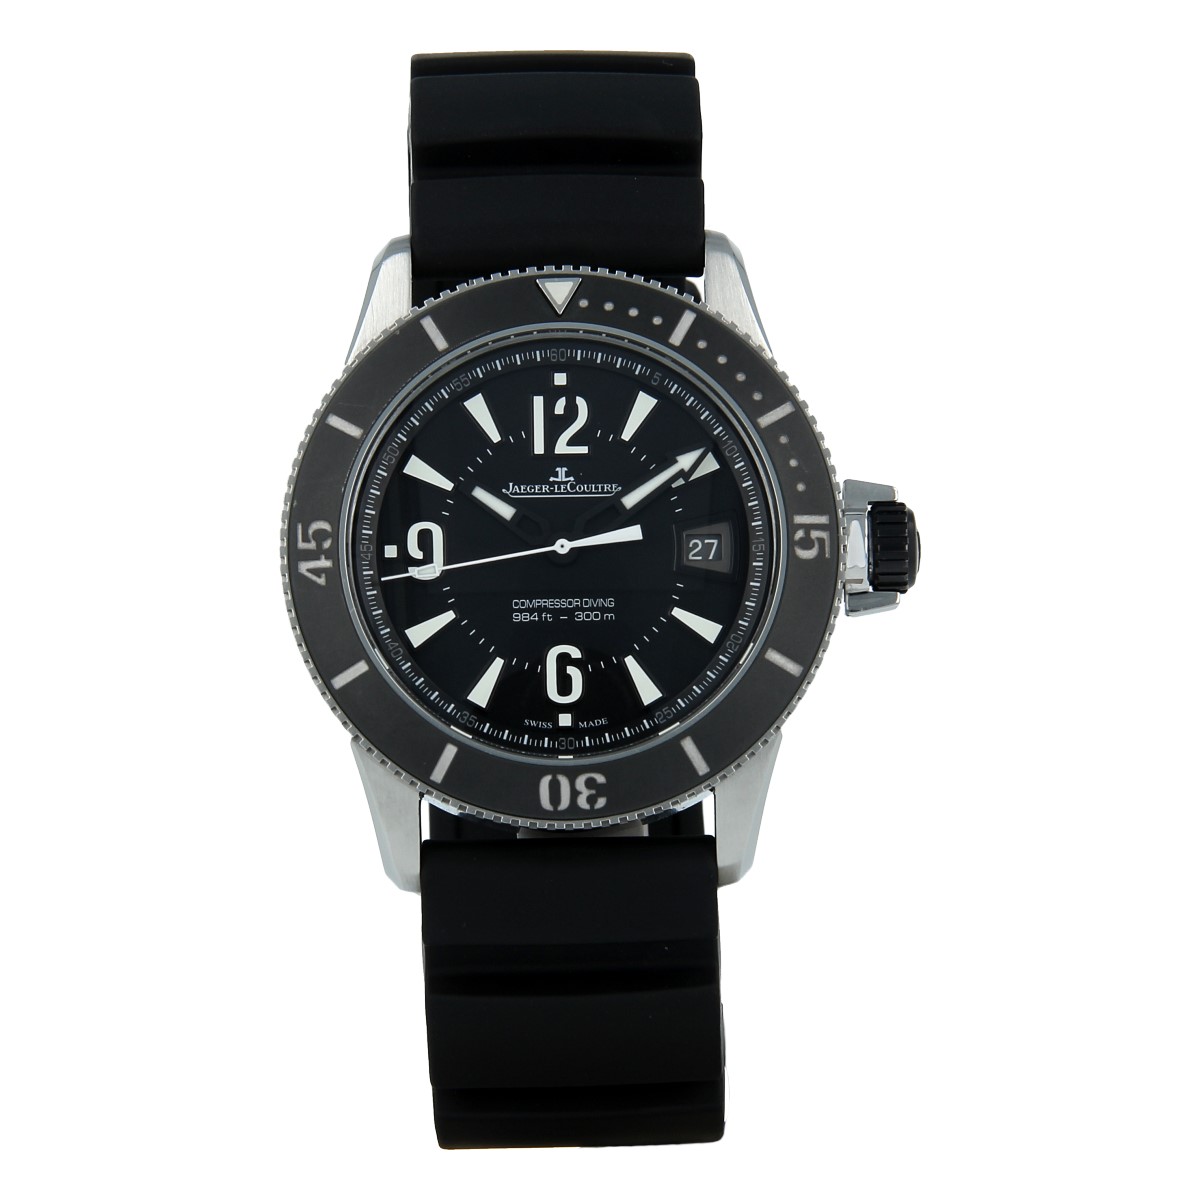 Jaeger-LeCoultre Master Compressor Diving US Navy SEALs *Limited Edition* | Buy pre-owned Jaeger-LeCoultre watch